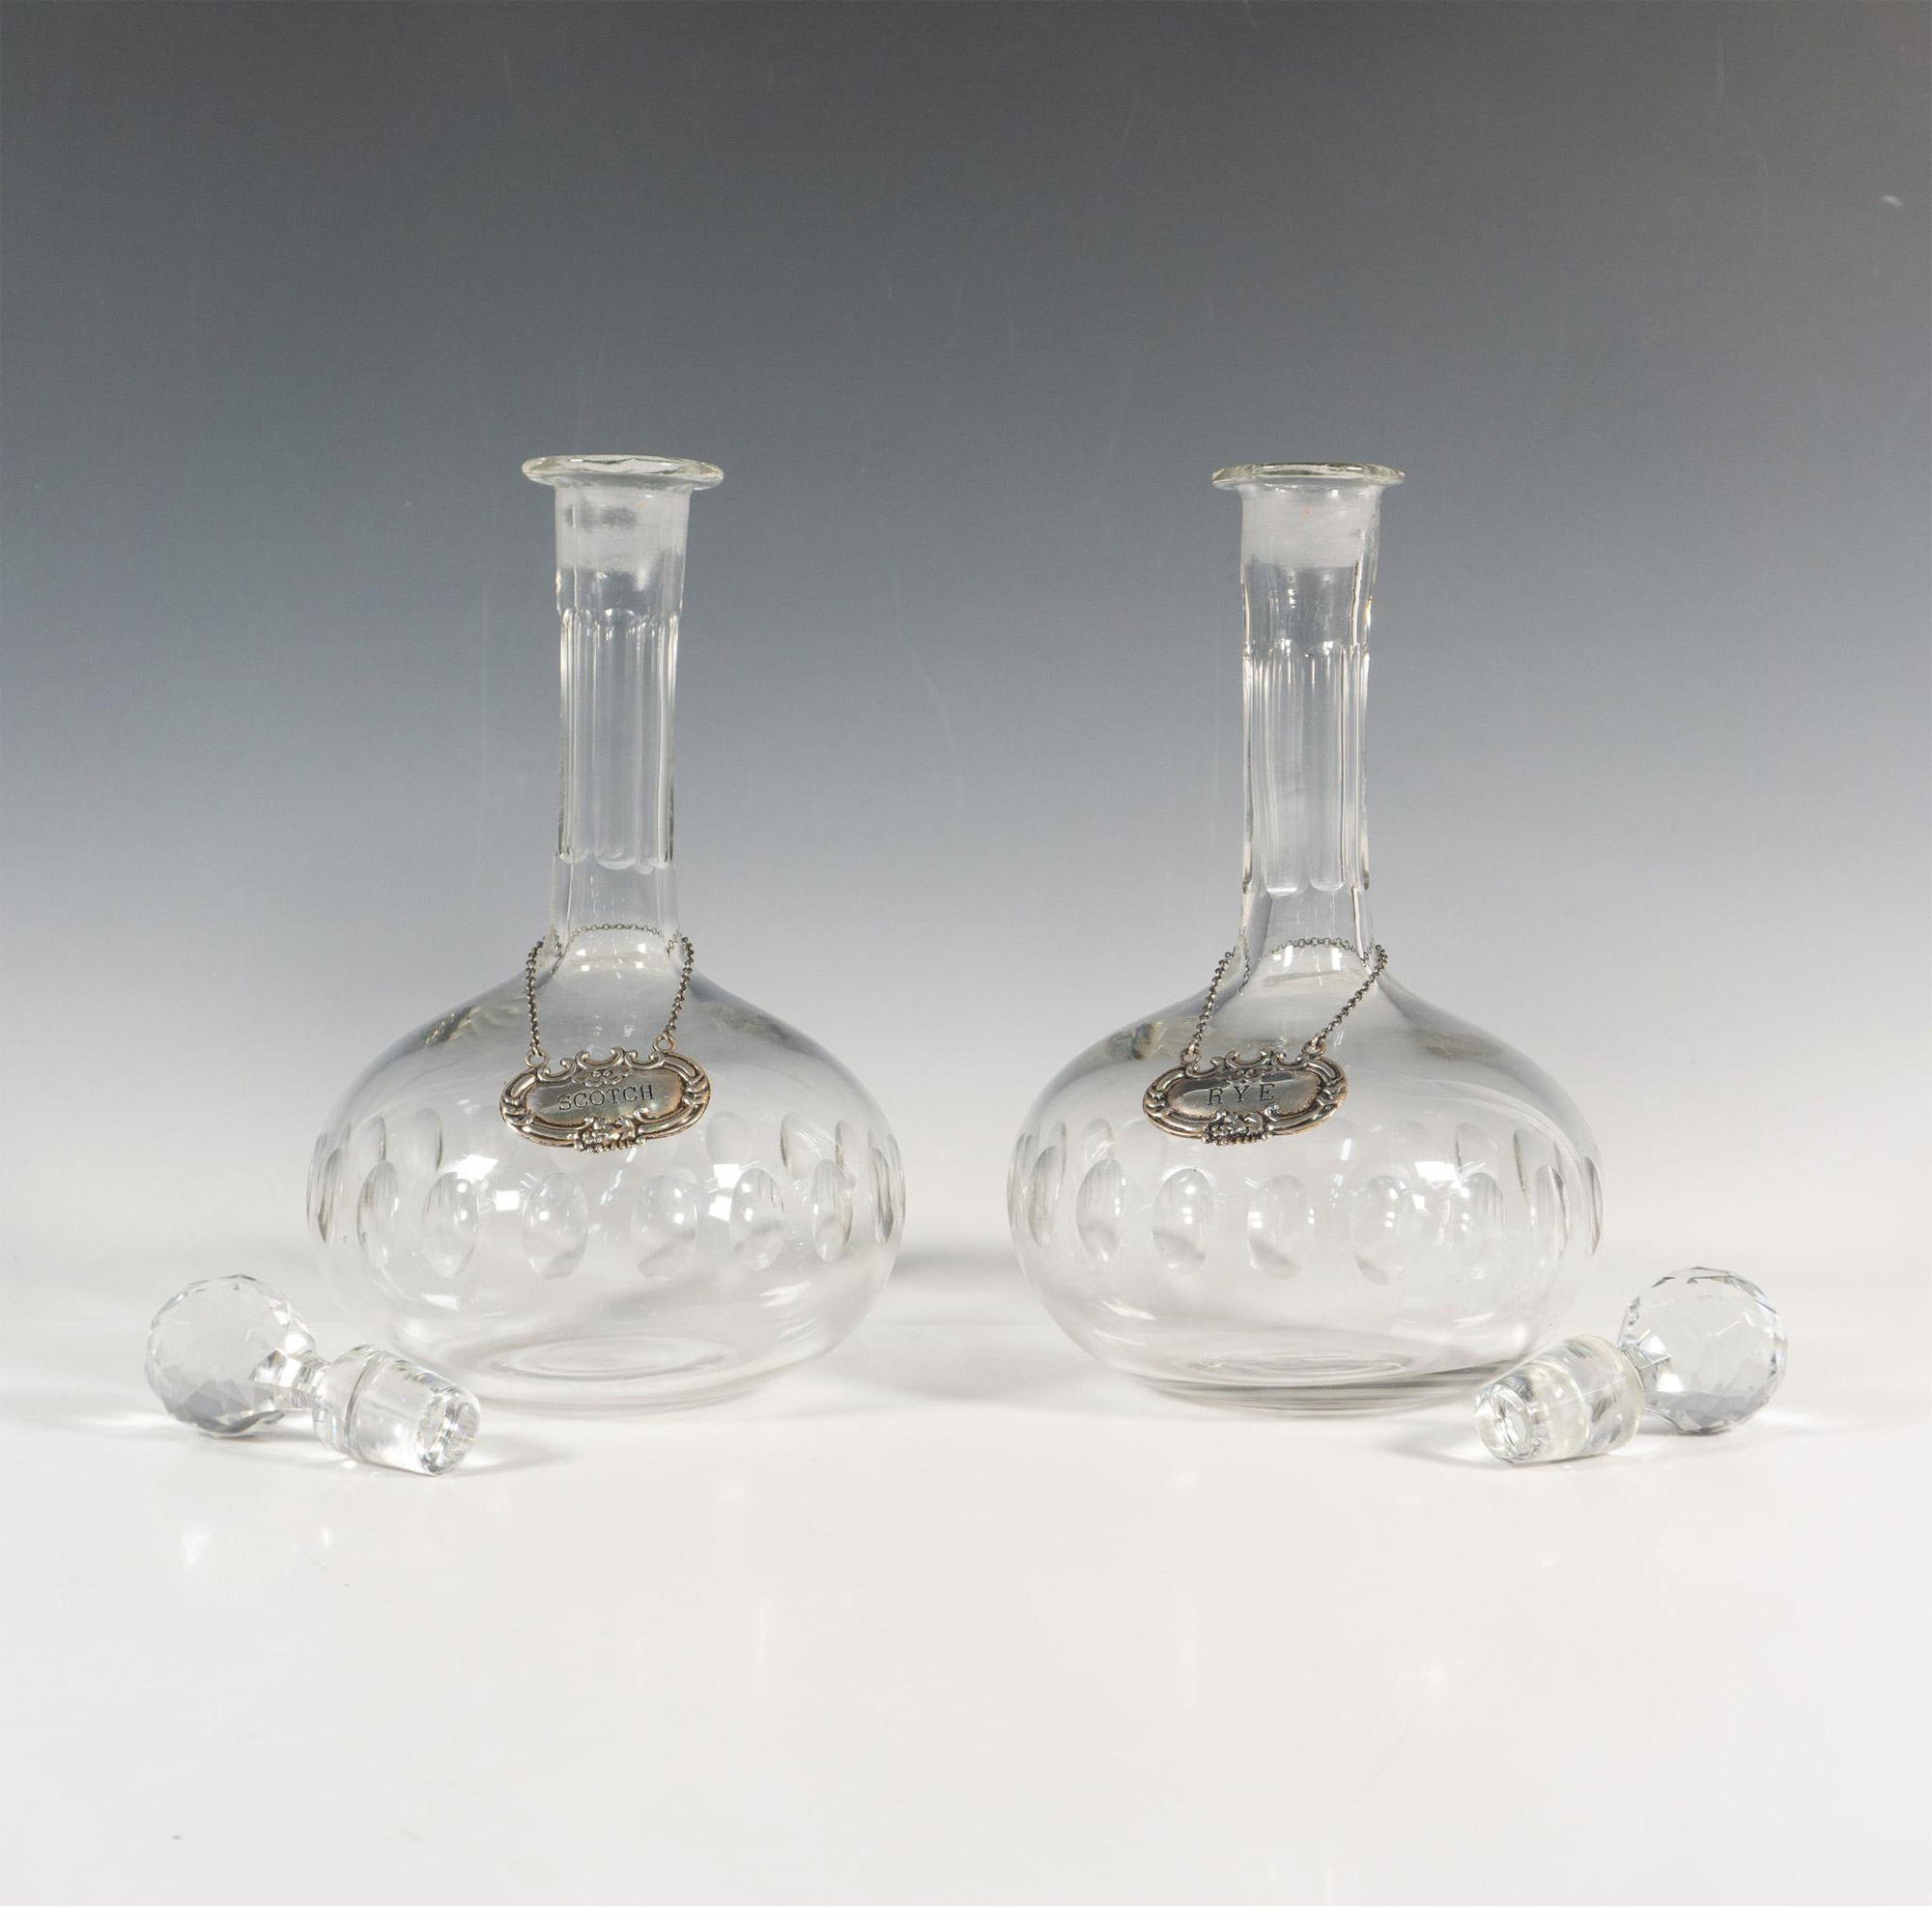 2pc Glass Decanters with Sterling Silver Liquor Tags - Image 2 of 4